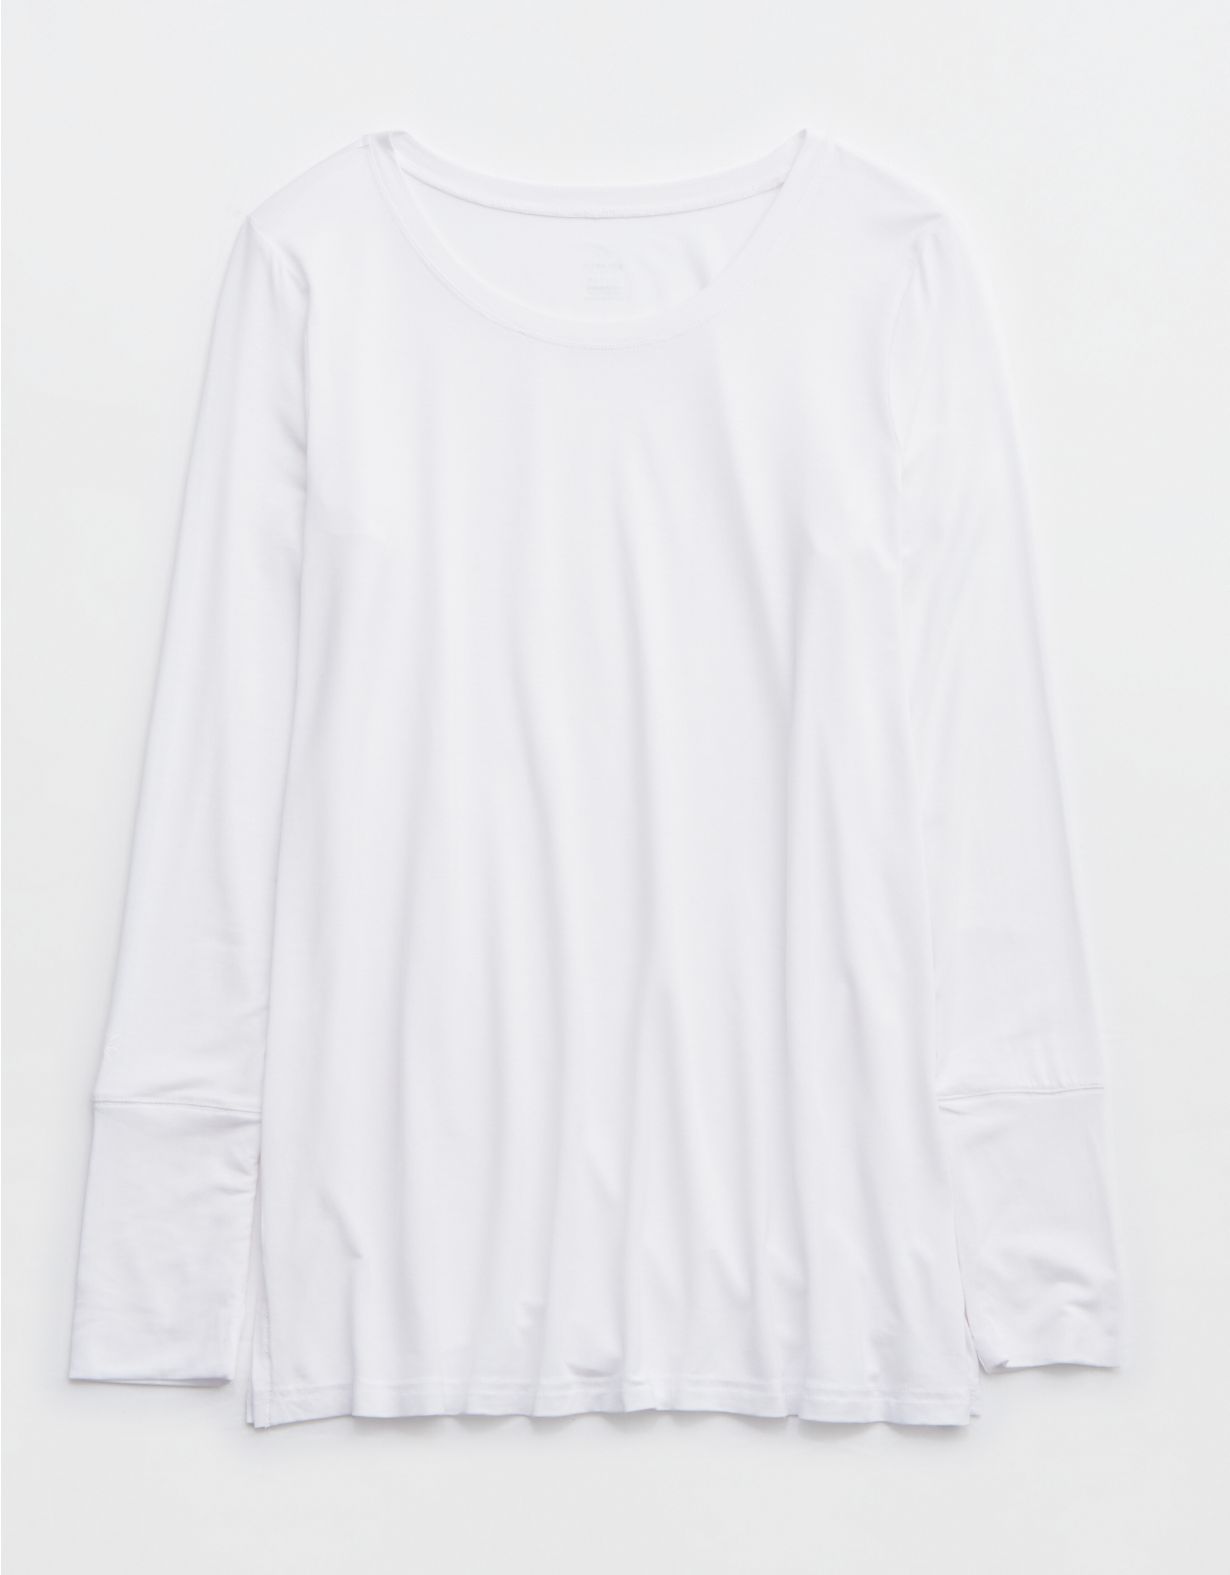 OFFLINE By Aerie Thumbs Up Oversized T-Shirt